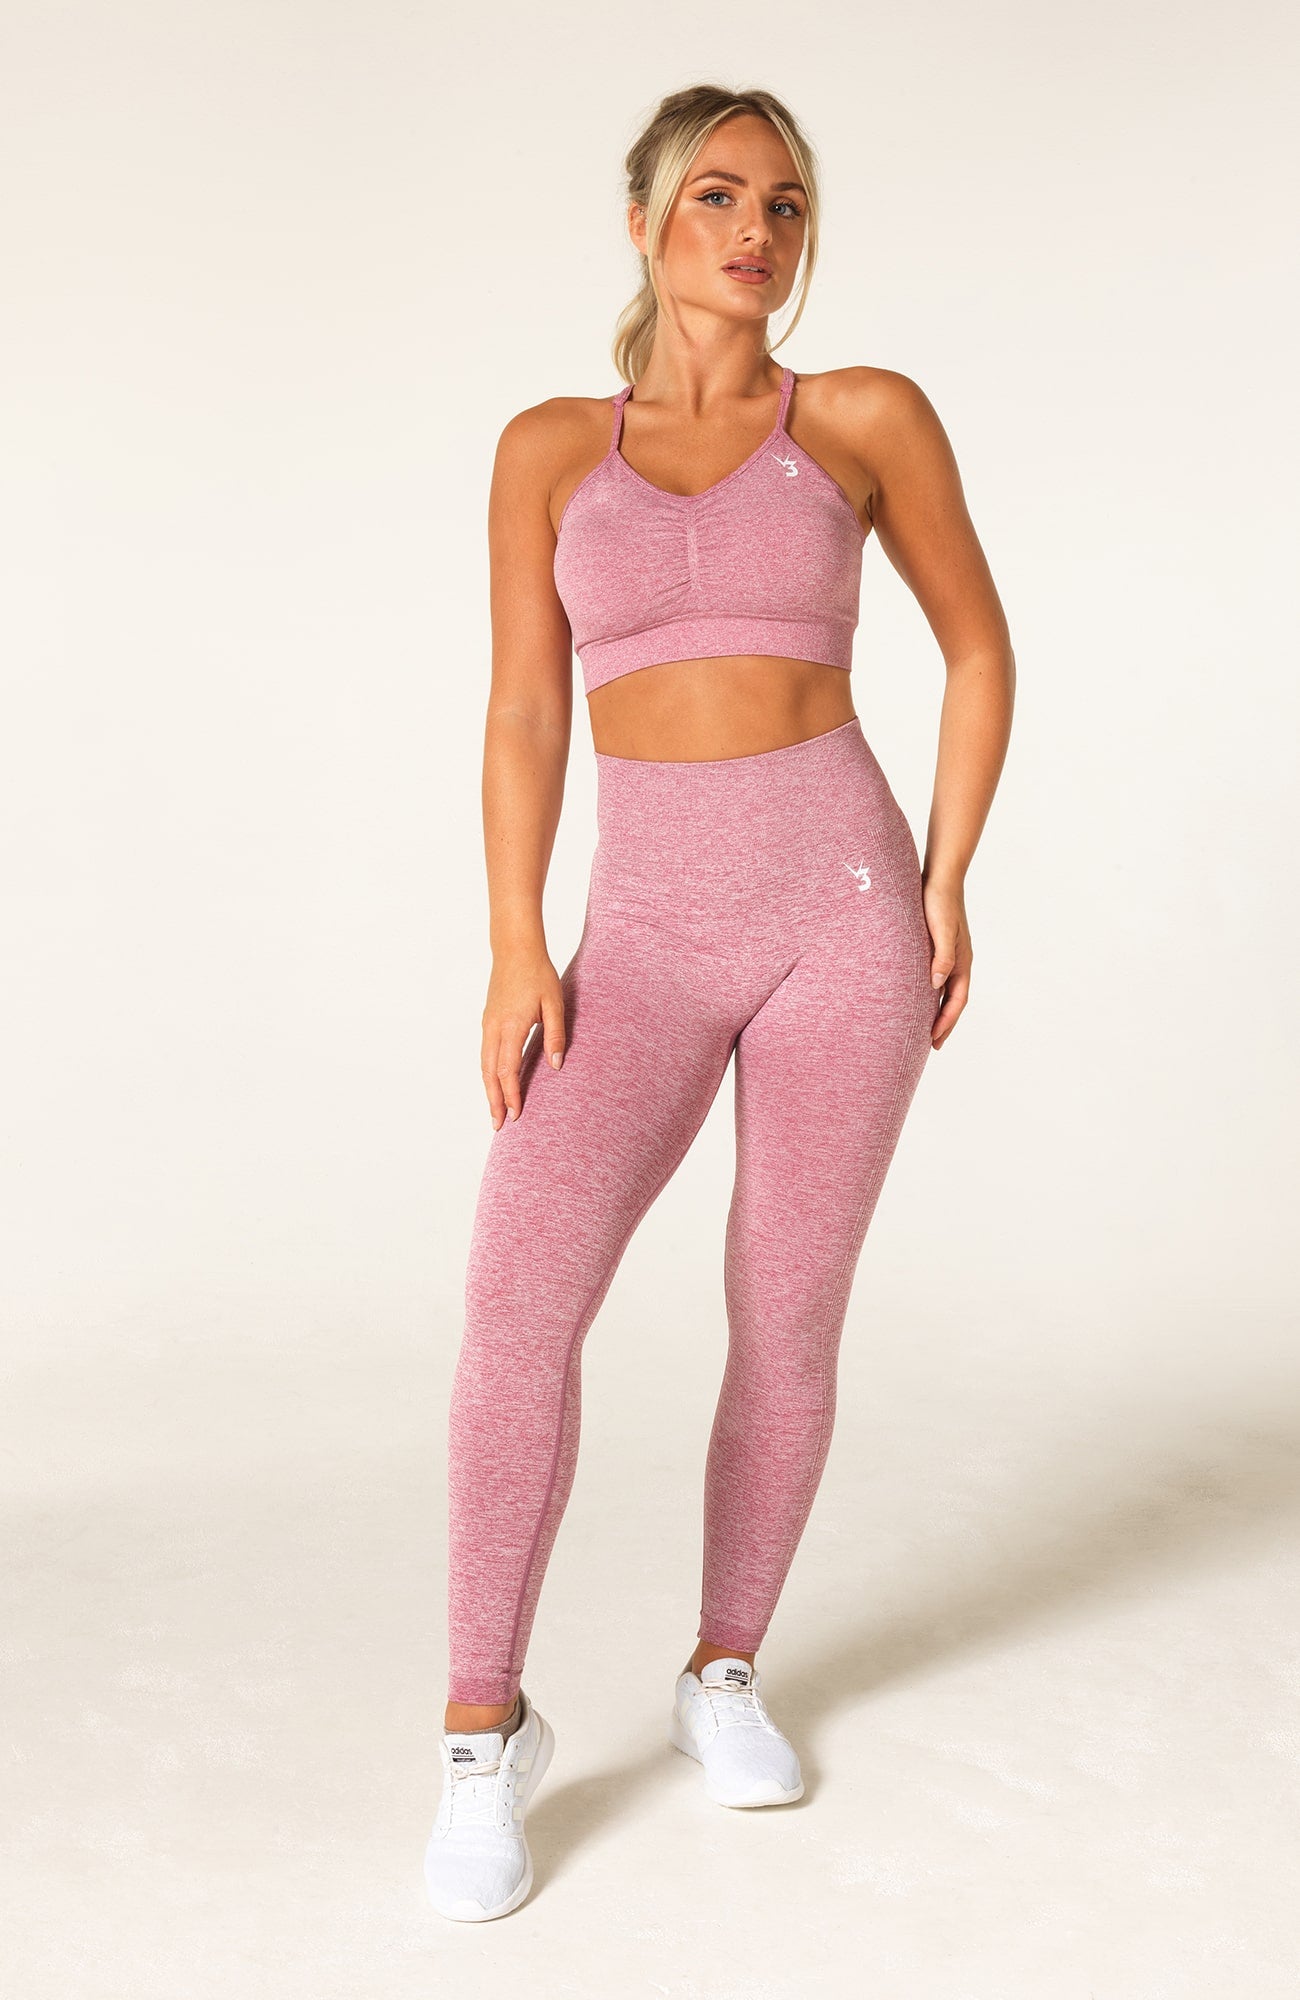 V3 Apparel womens Define Pink marl scrunch bum shaping workout gym leggings and squat proof fitness tights with high waisted and ruched seam for running, yoga, gym bodybuilding and training.